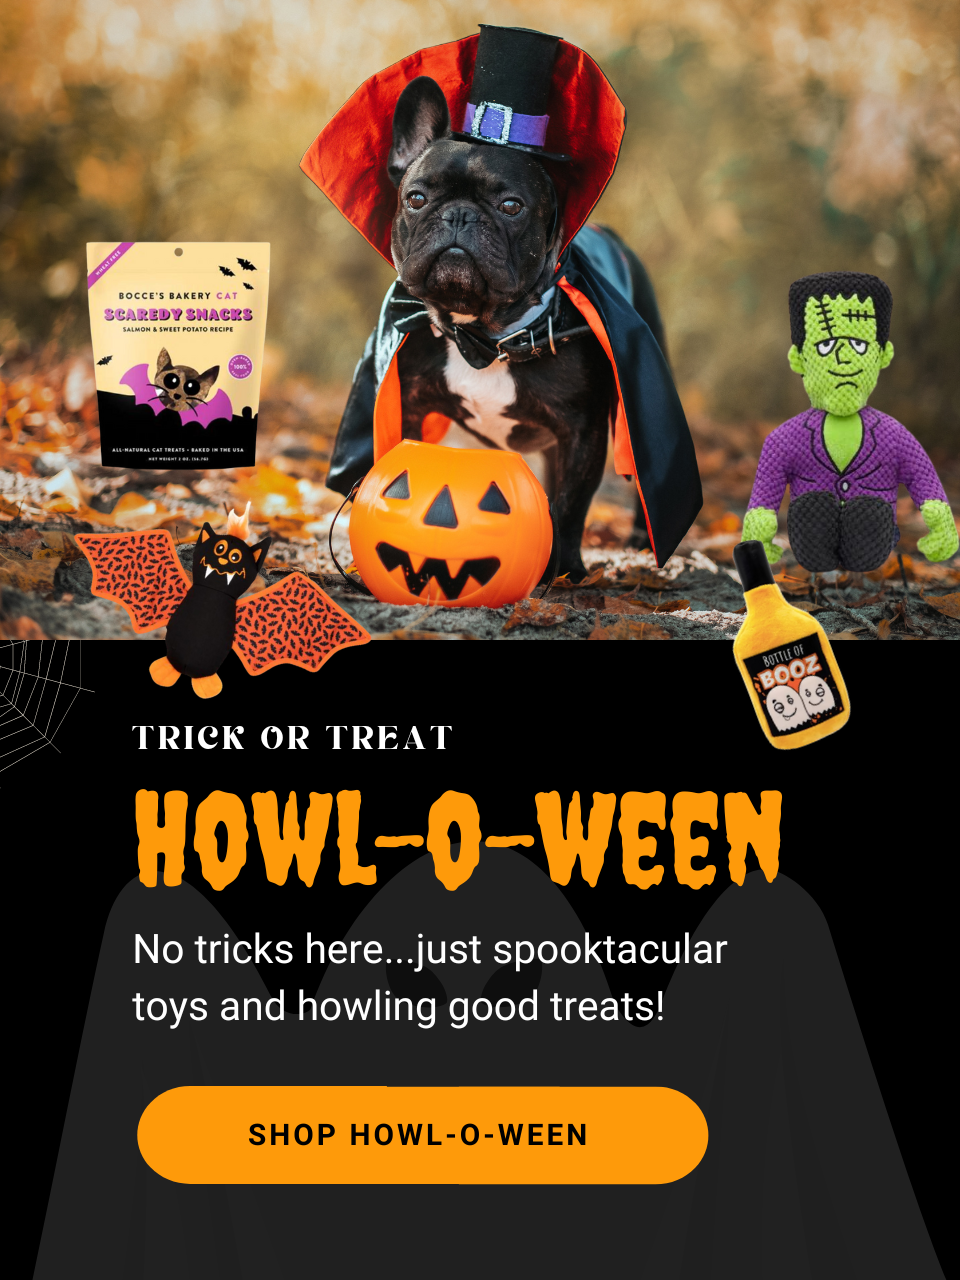 Trick or Treat! It's Howl-O-Ween! No tricks here...just spooktacular toys and howling good treats! Shop now!